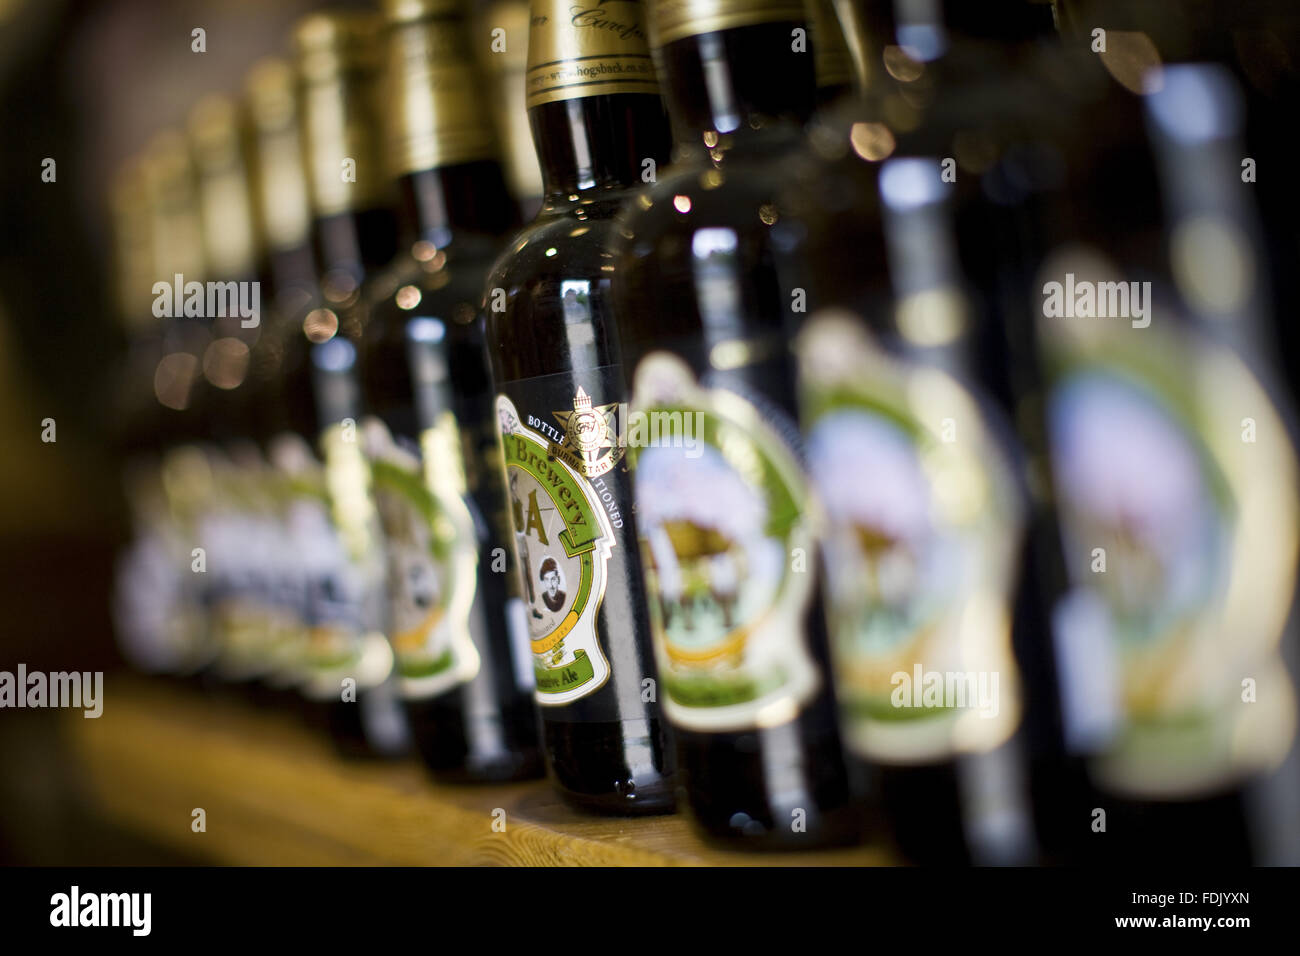 Bottles of beer in the Farm Shop at Polesden Lacey, Surrey. Stock Photo